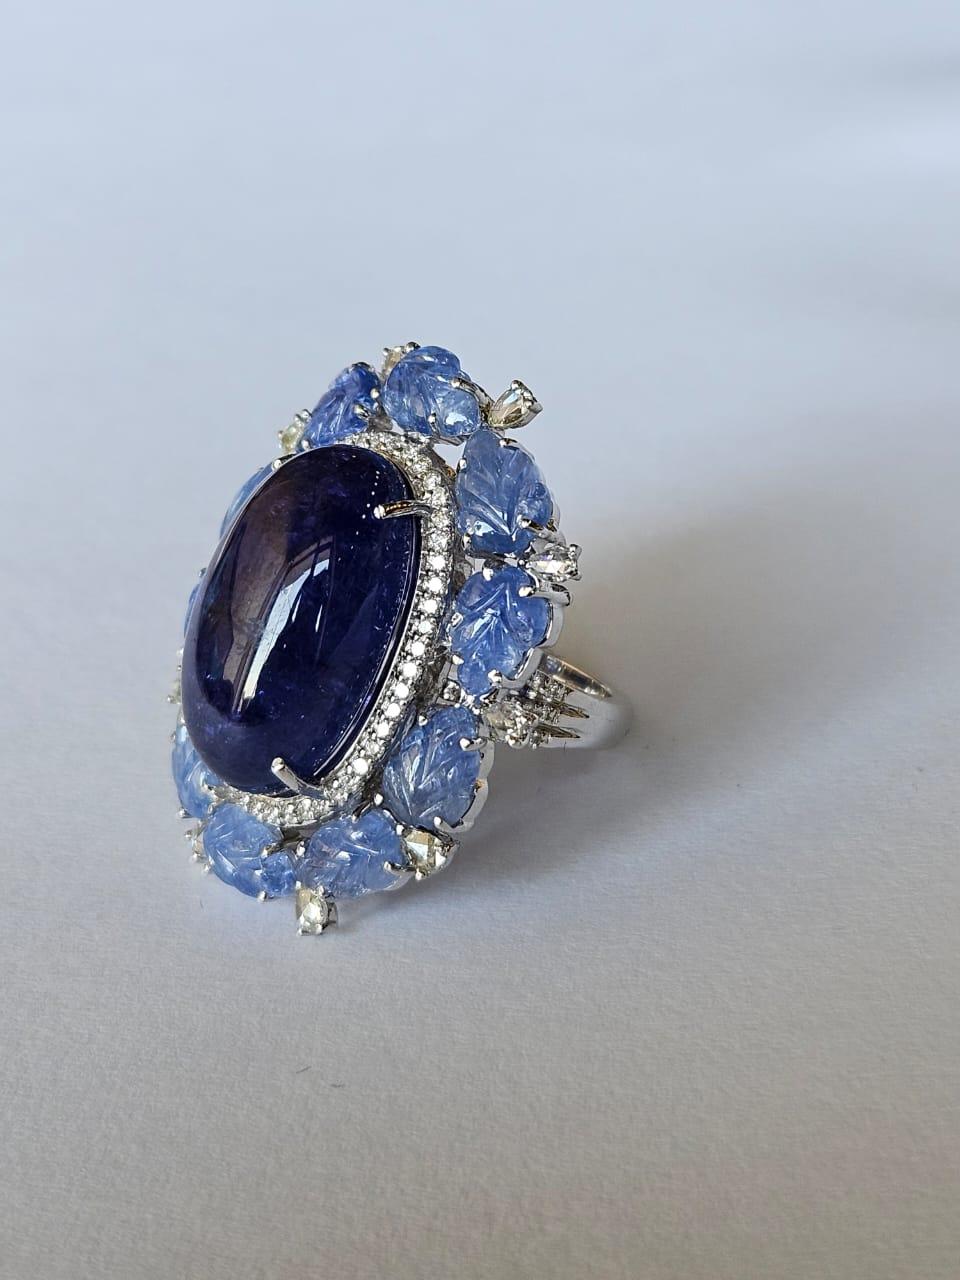 Cabochon Set in 18K Gold, 20.95 carats Tanzanite, Blue Sapphire & Diamonds Cocktail Ring For Sale